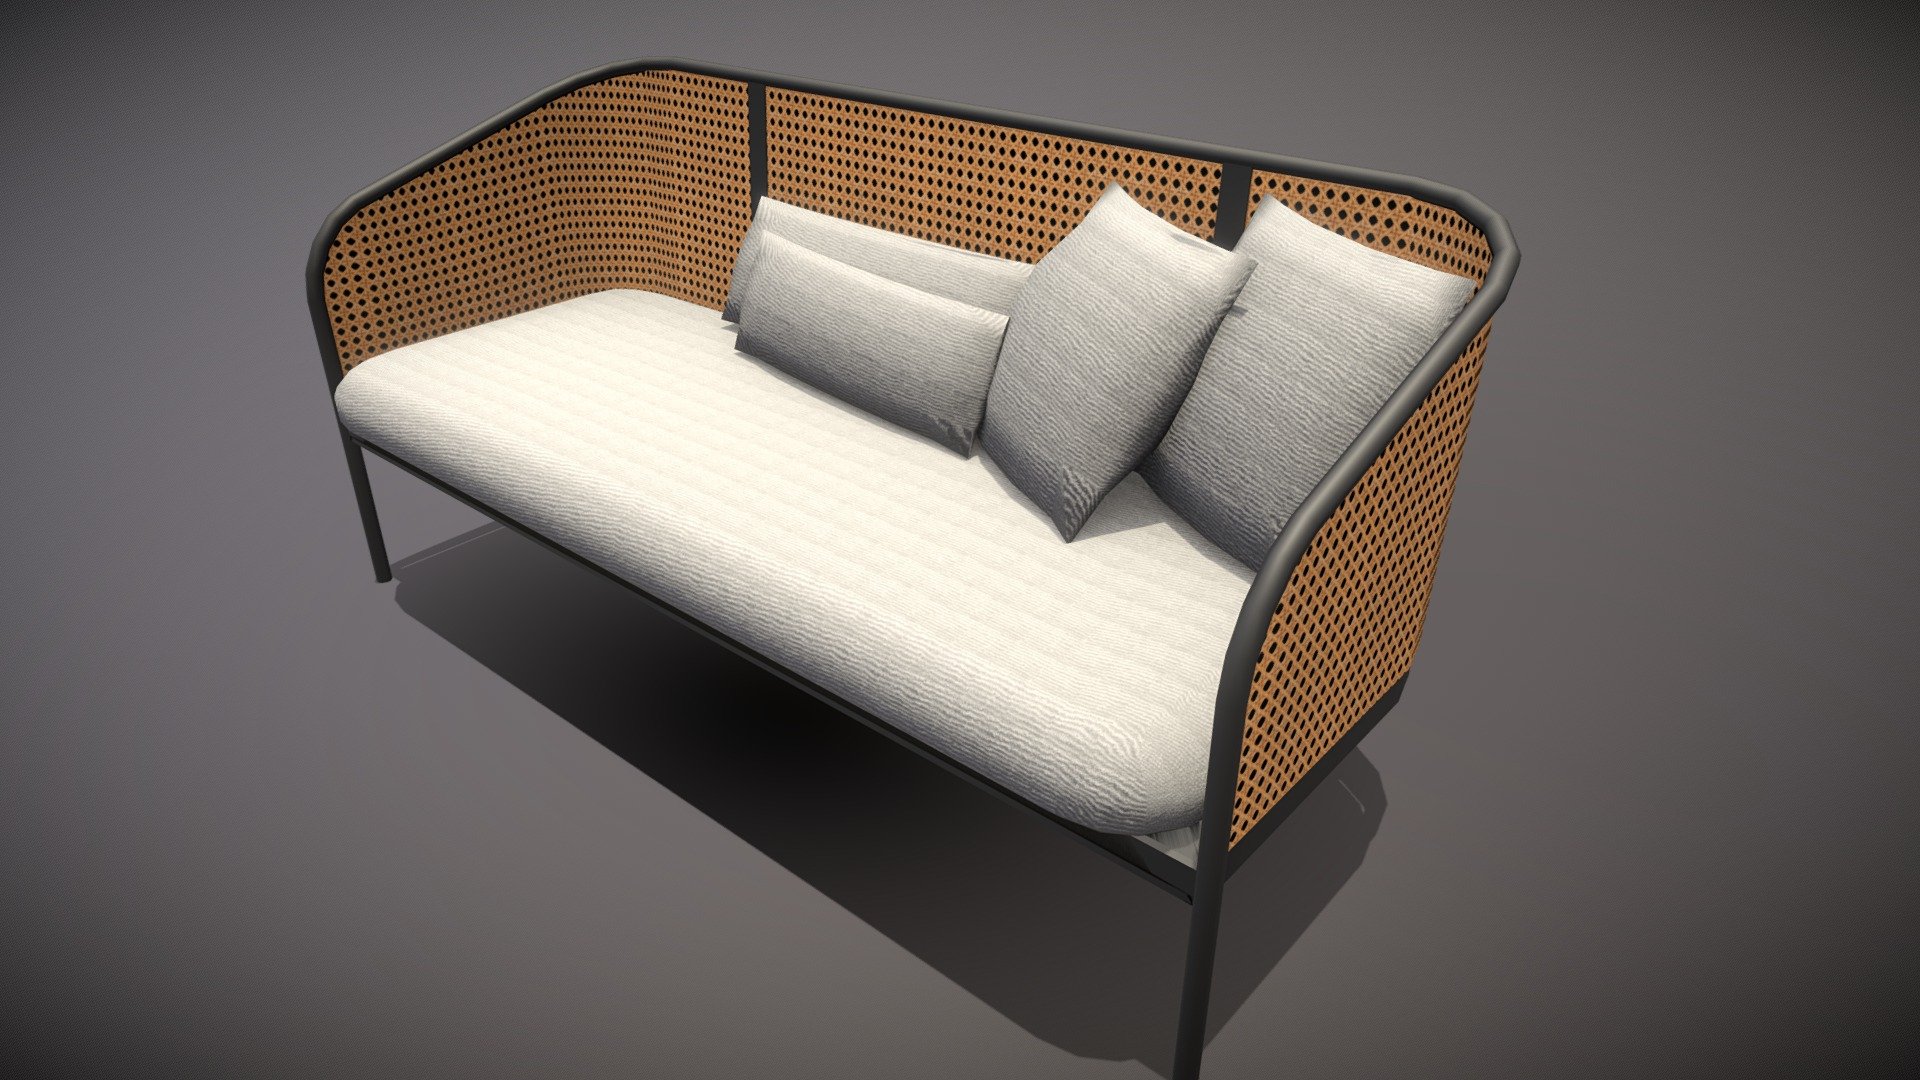 A lowpoly realistic sofa with bohemian design. A good fit for metaverse, VR, AR, or environment object for games. 1622 Tris, Available PBR Textures (4096x4096) : -Static Lightbaked Texture -AO -Roughness -Normal -Diffuse - Lowpoly Realistic Bohemian Sofa 4 - 3D model by Underground Lab (@xaverius0404) 3d model